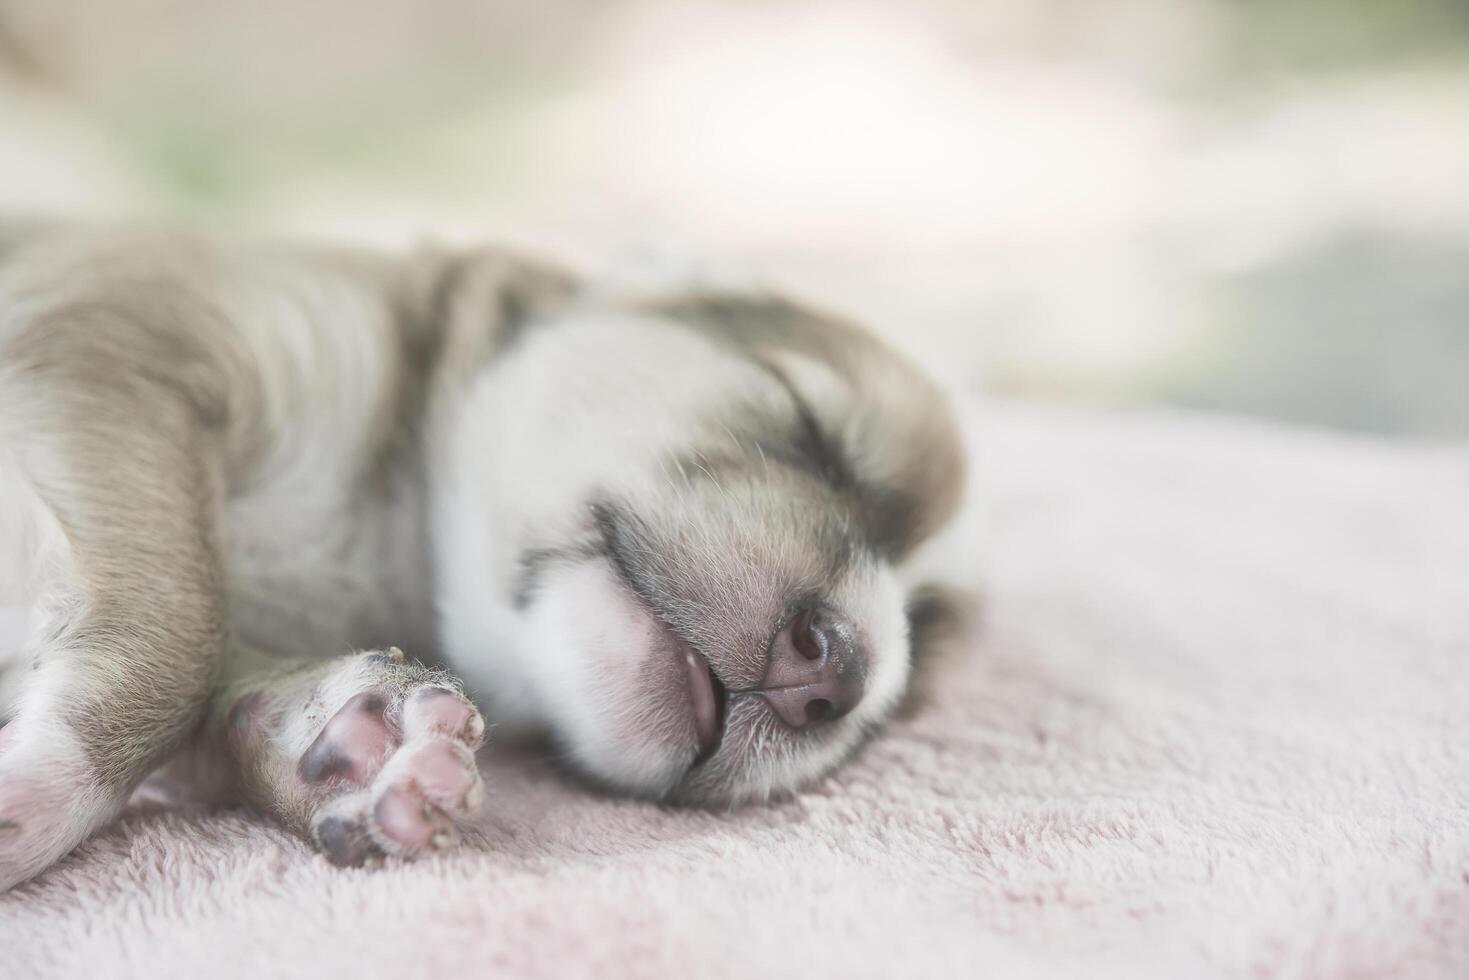 Adorable Small Puppy Relaxing on bed. photo